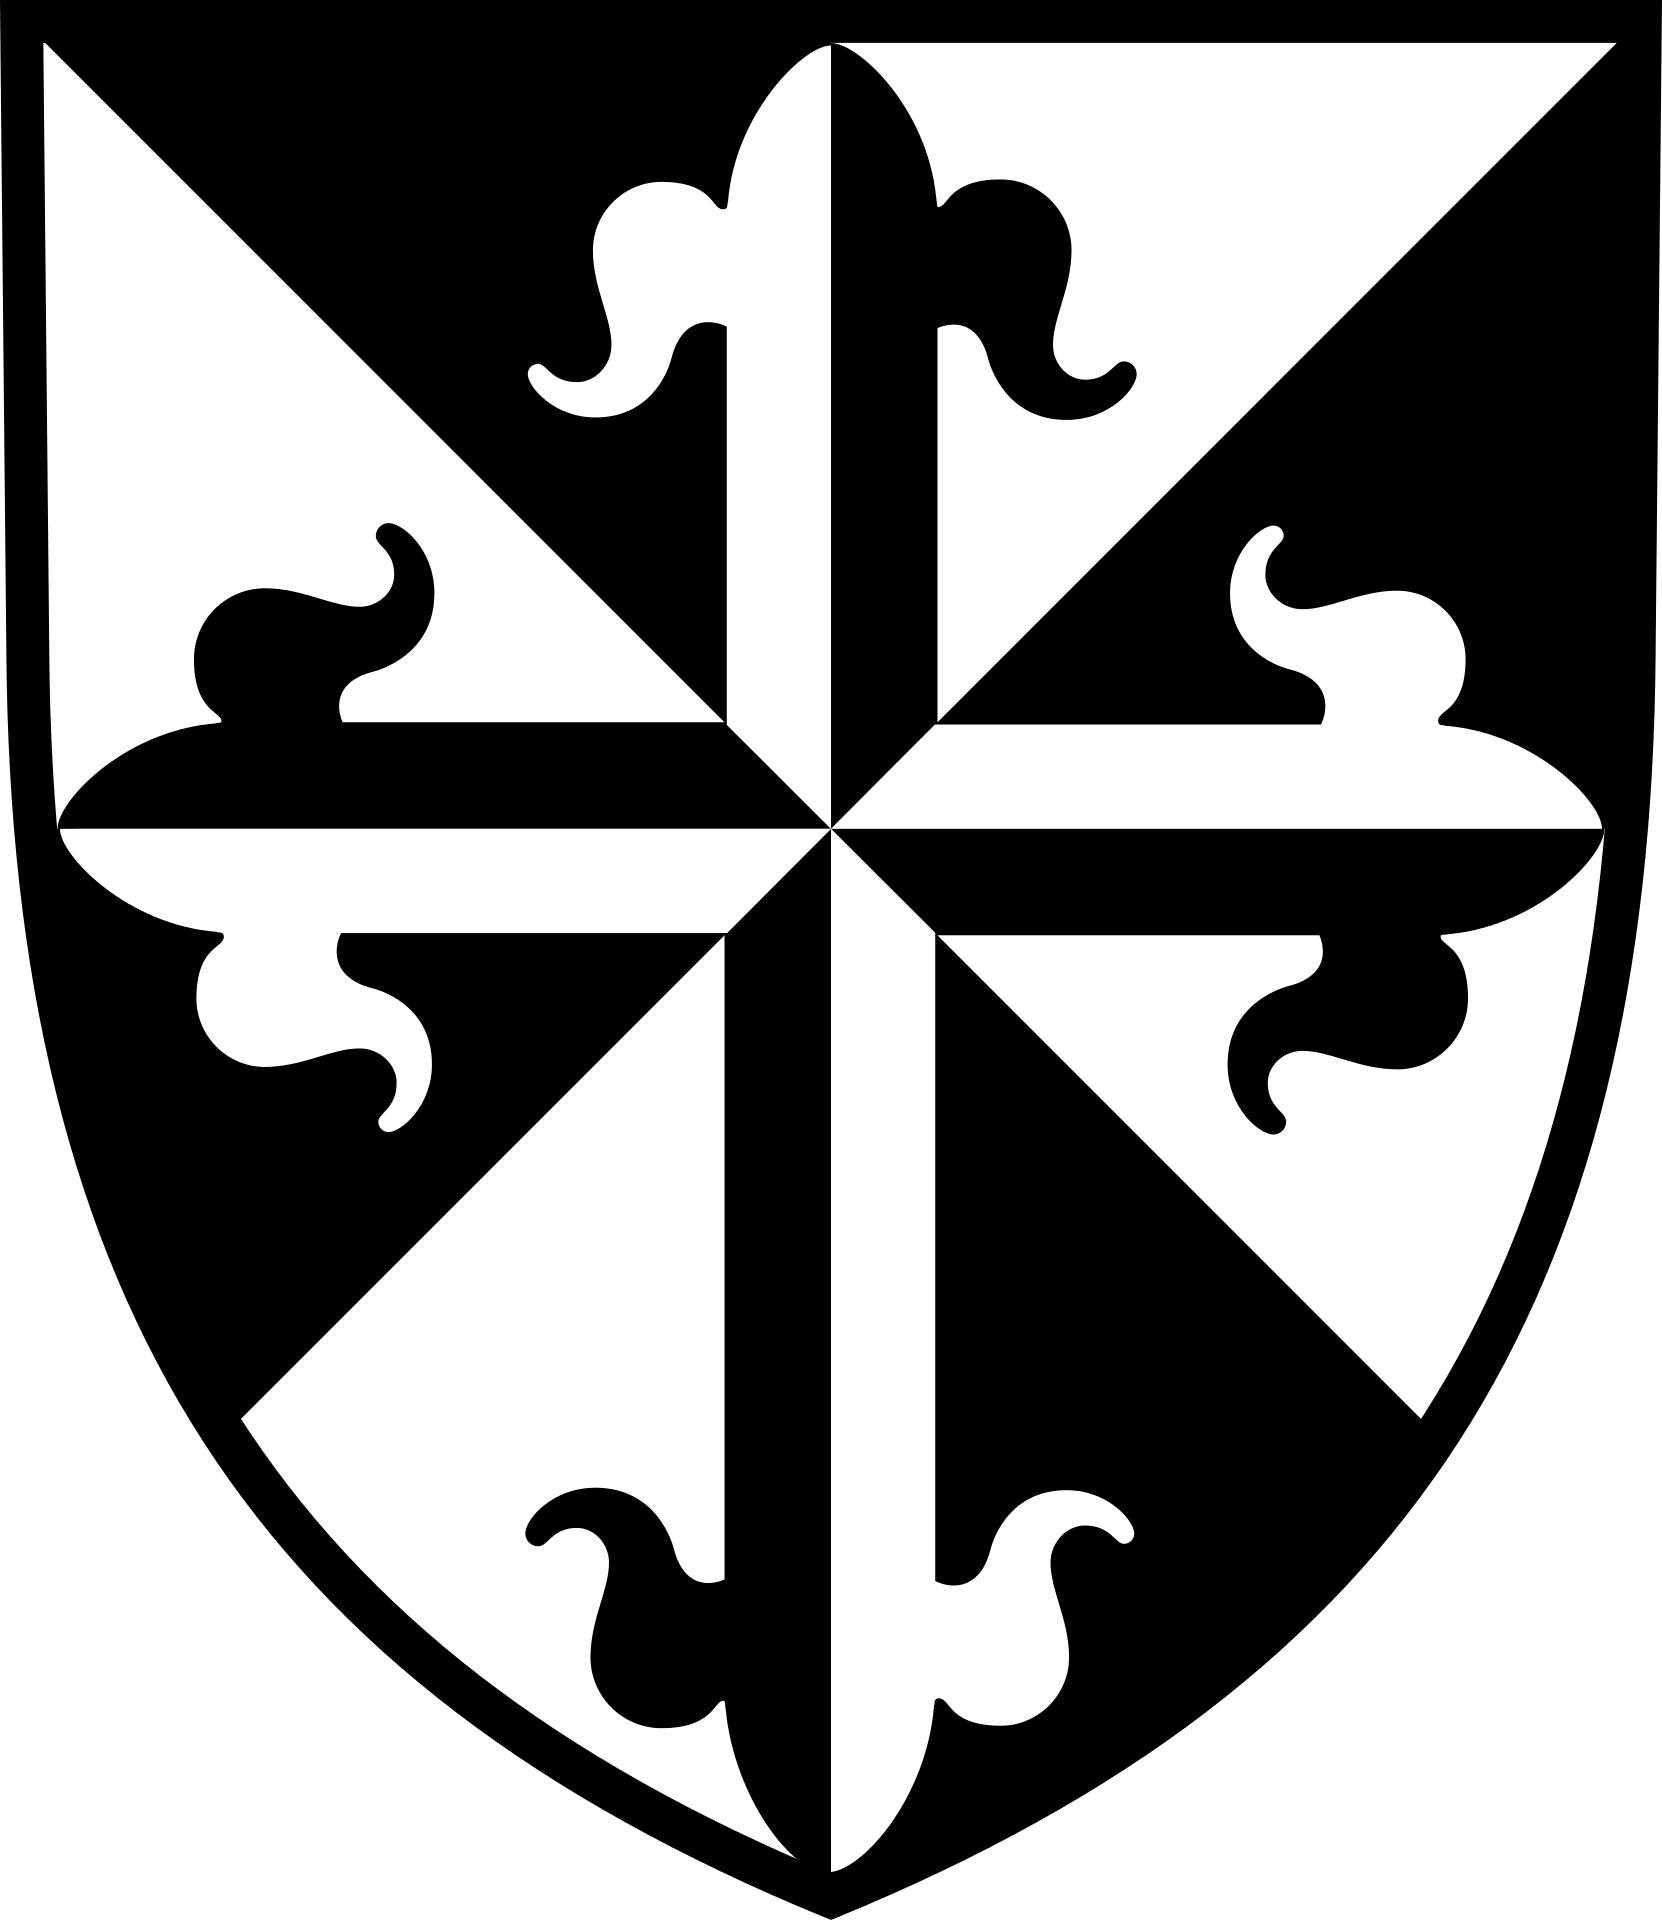 The Dominican Shield, with a cross as its emblem